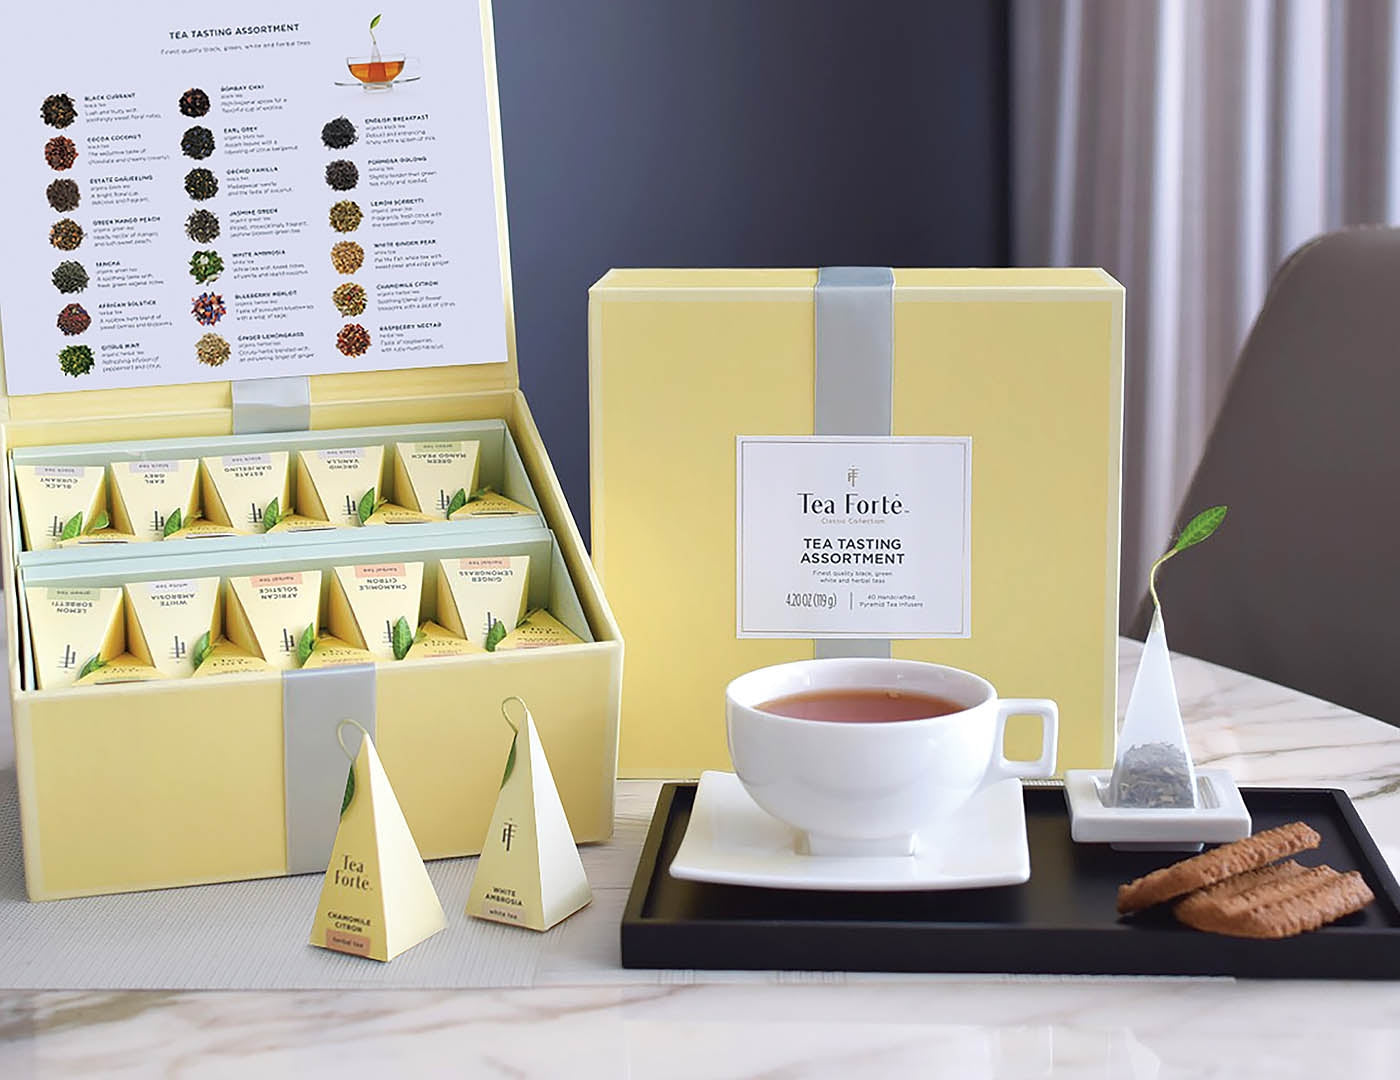 Tea Tasting tea assortment in a 40 count tea chest of pyramid infusers on table